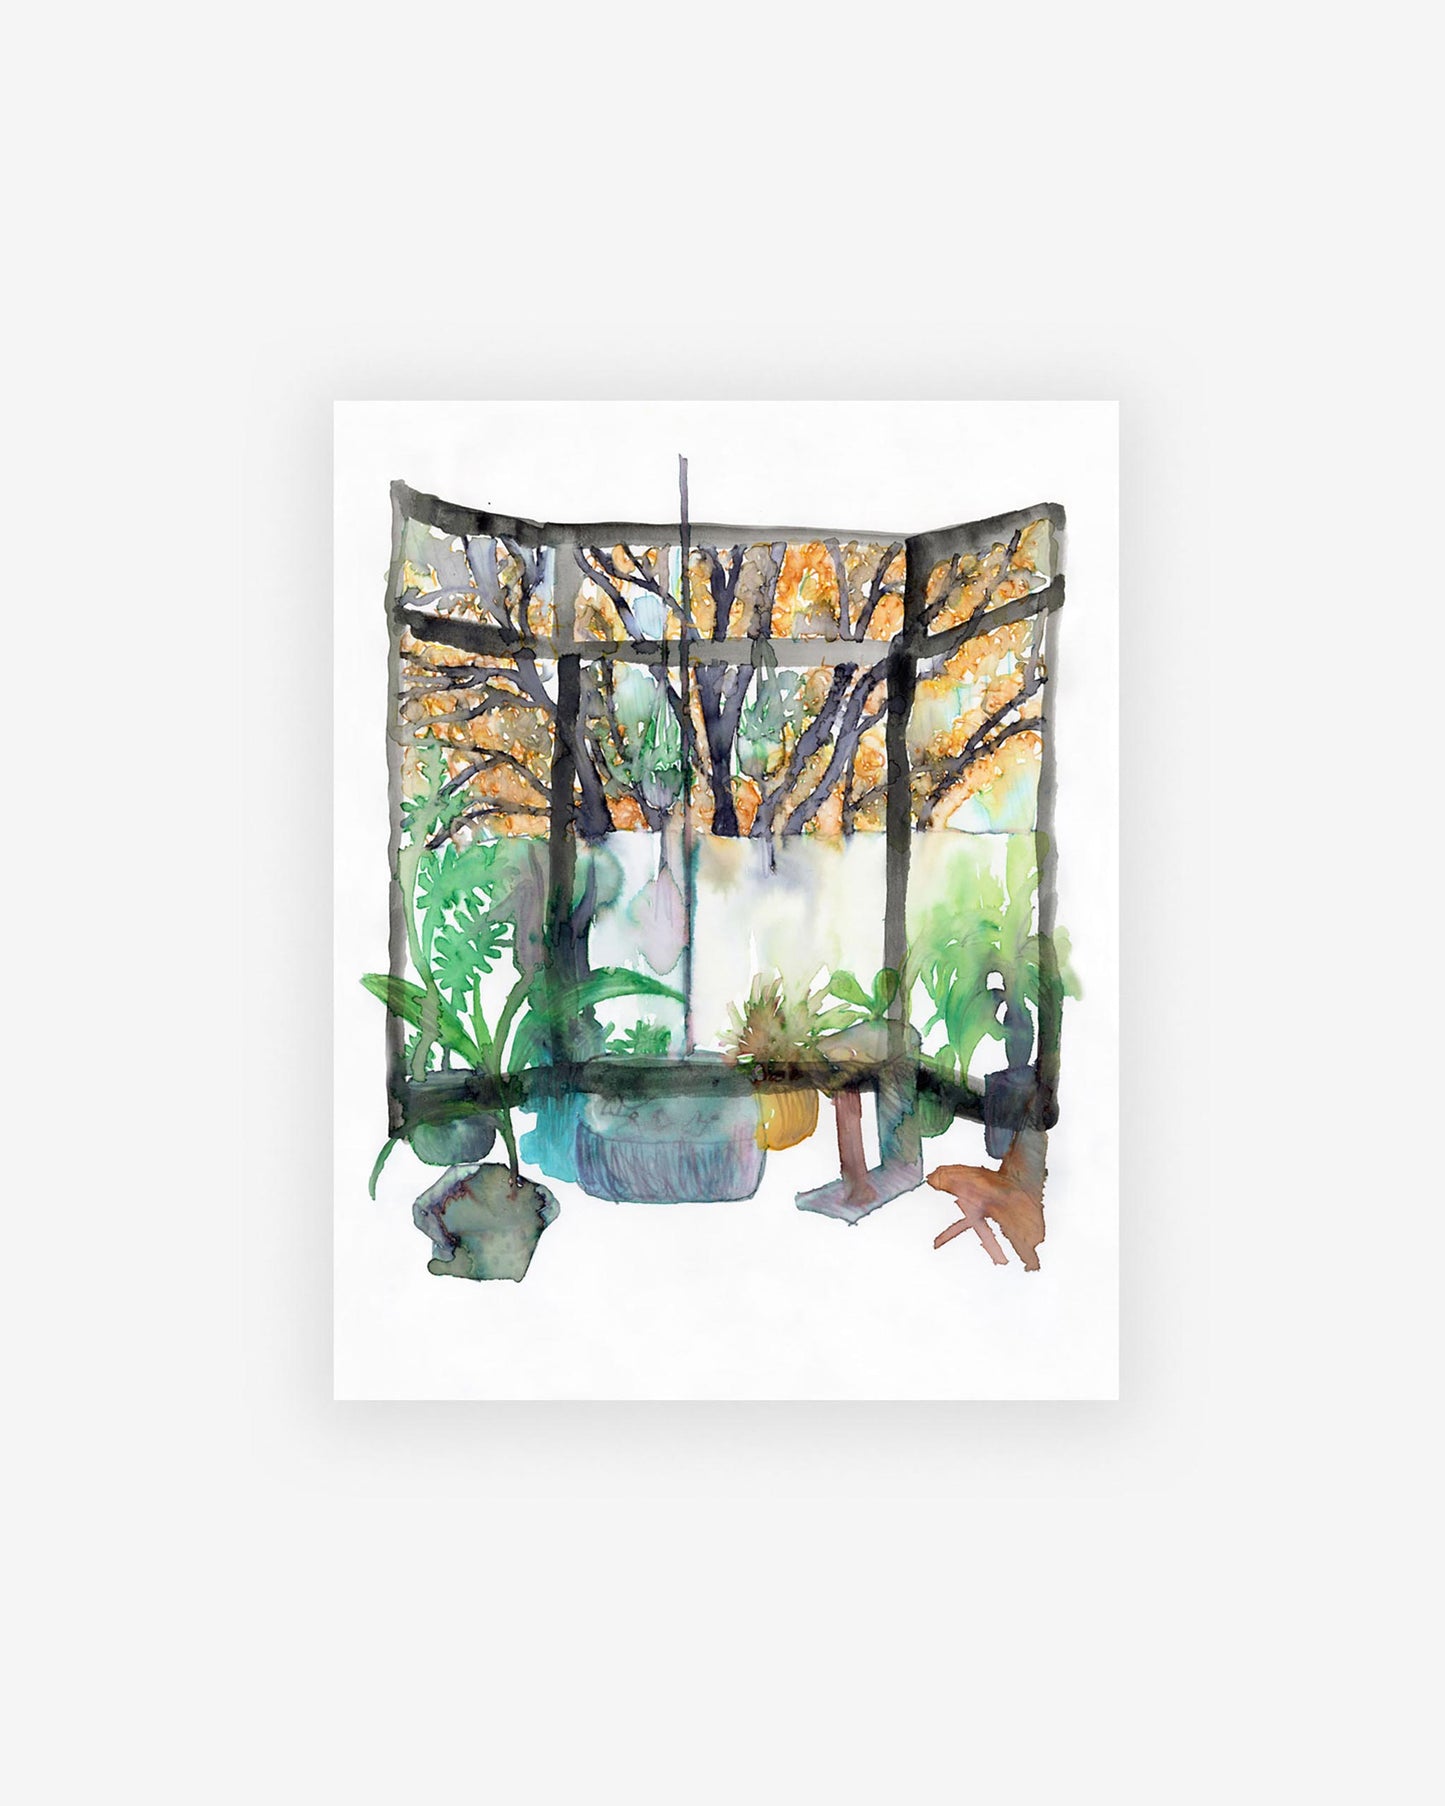 A watercolor painting by the artist, Eskayel founder, featuring a Apartment Print Two